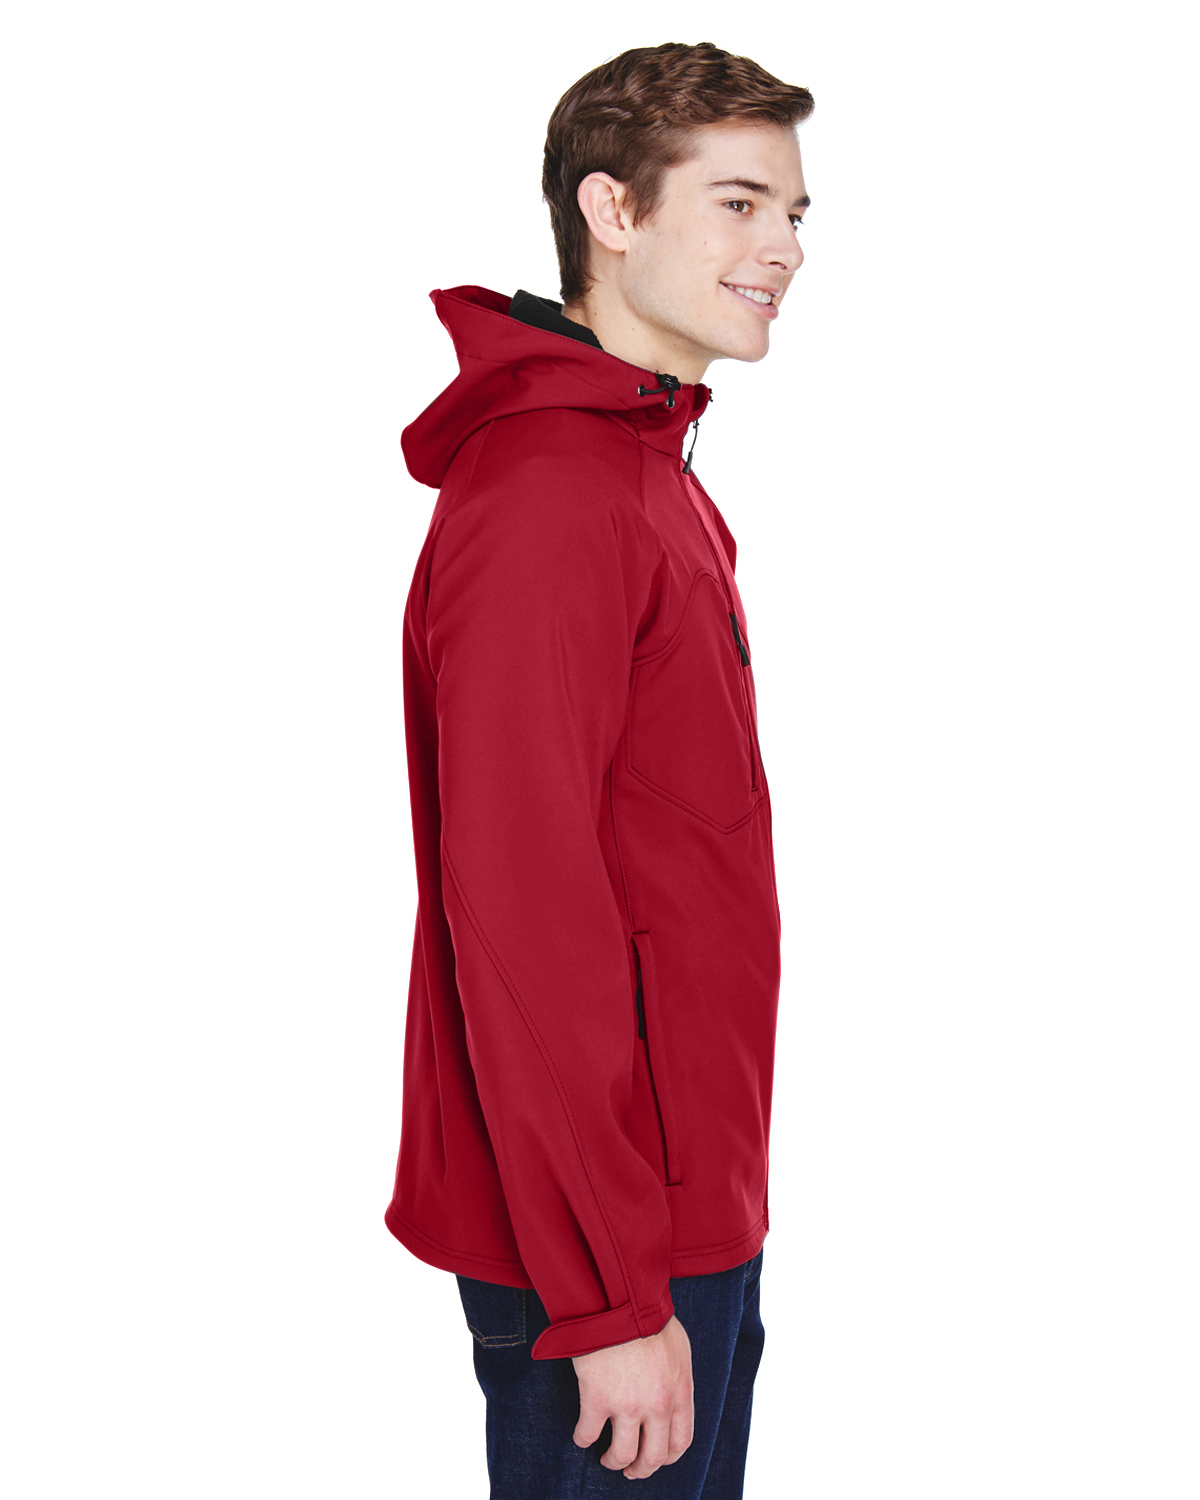 Men's Prospect Two-Layer Fleece Bonded Soft Shell Hooded Jacket - MOLTEN RED - XL - image 3 of 3